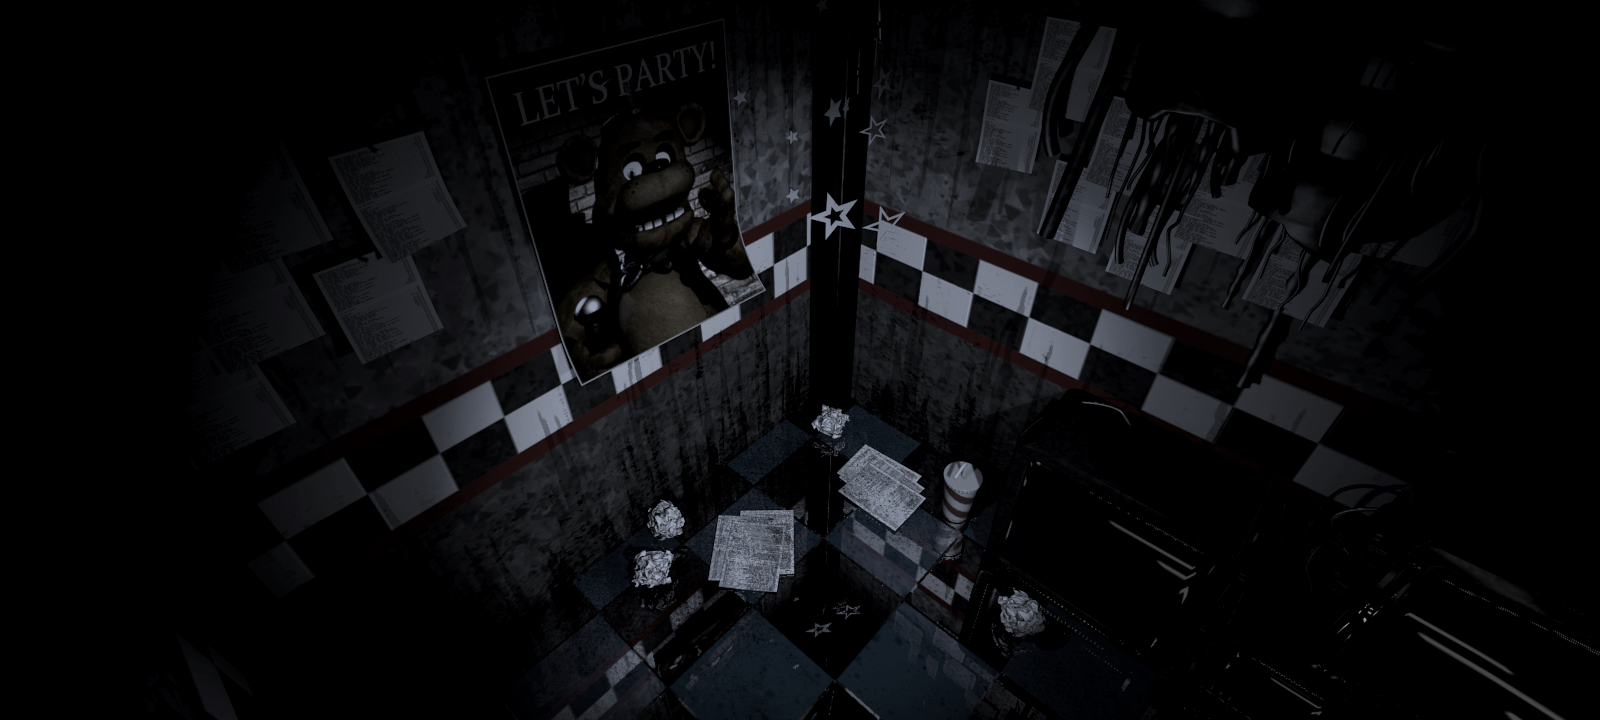 First footage of the kitchen camera in Five nights at freddys 